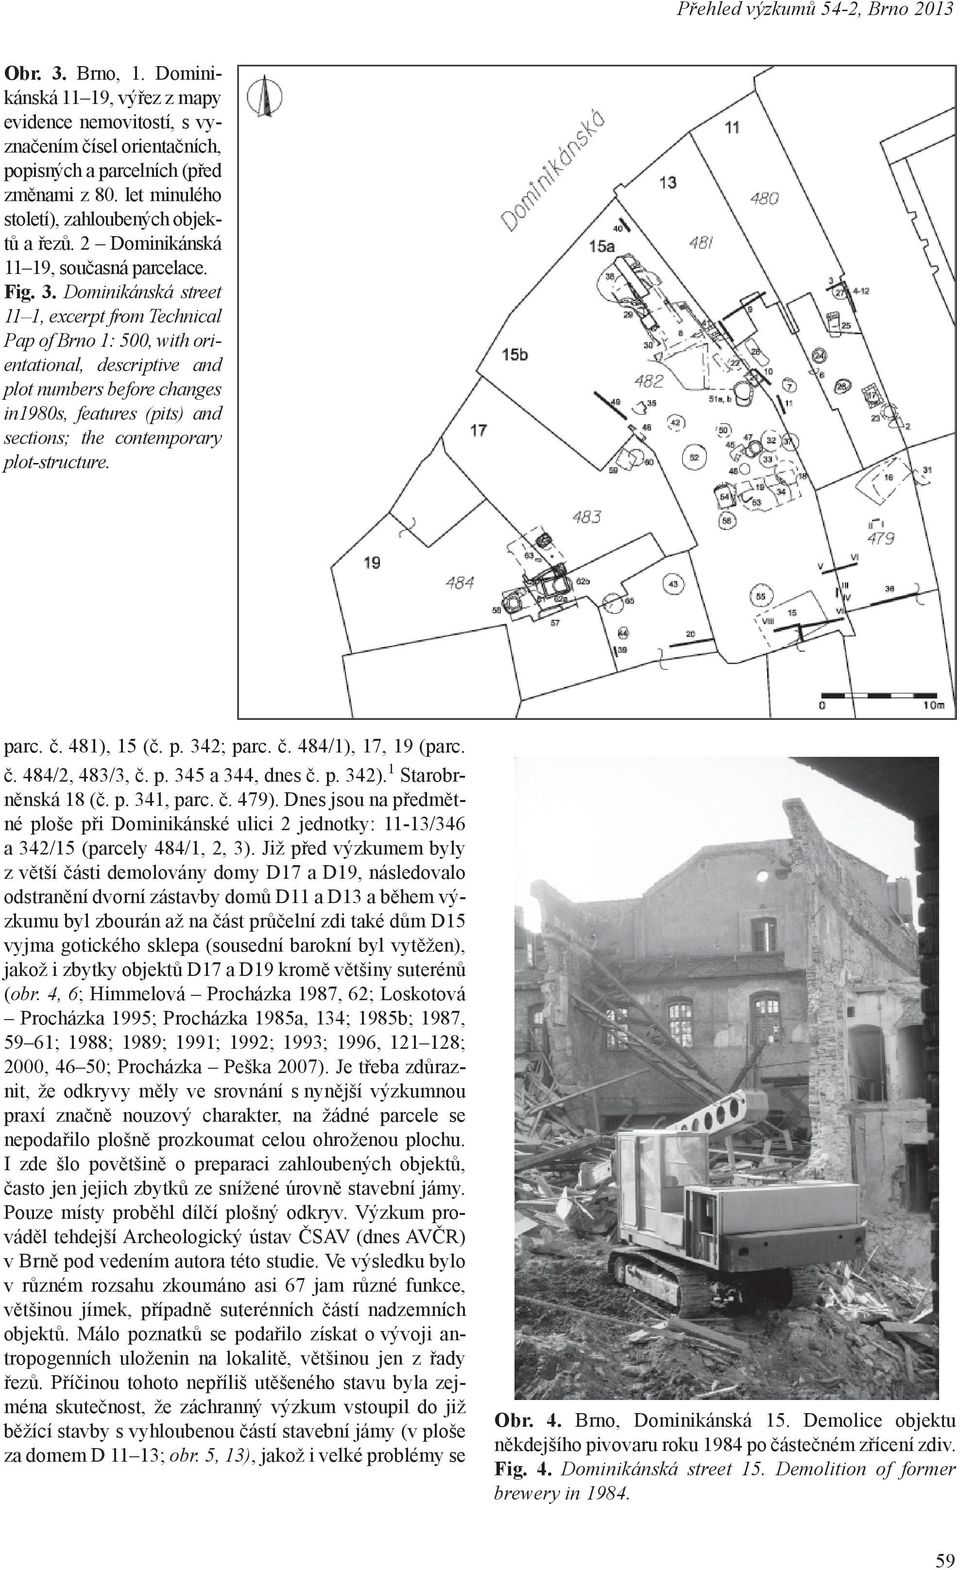 Dominikánská street 11 1, excerpt from Technical Pap of Brno 1: 500, with orientational, descriptive and plot numbers before changes in1980s, features (pits) and sections; the contemporary